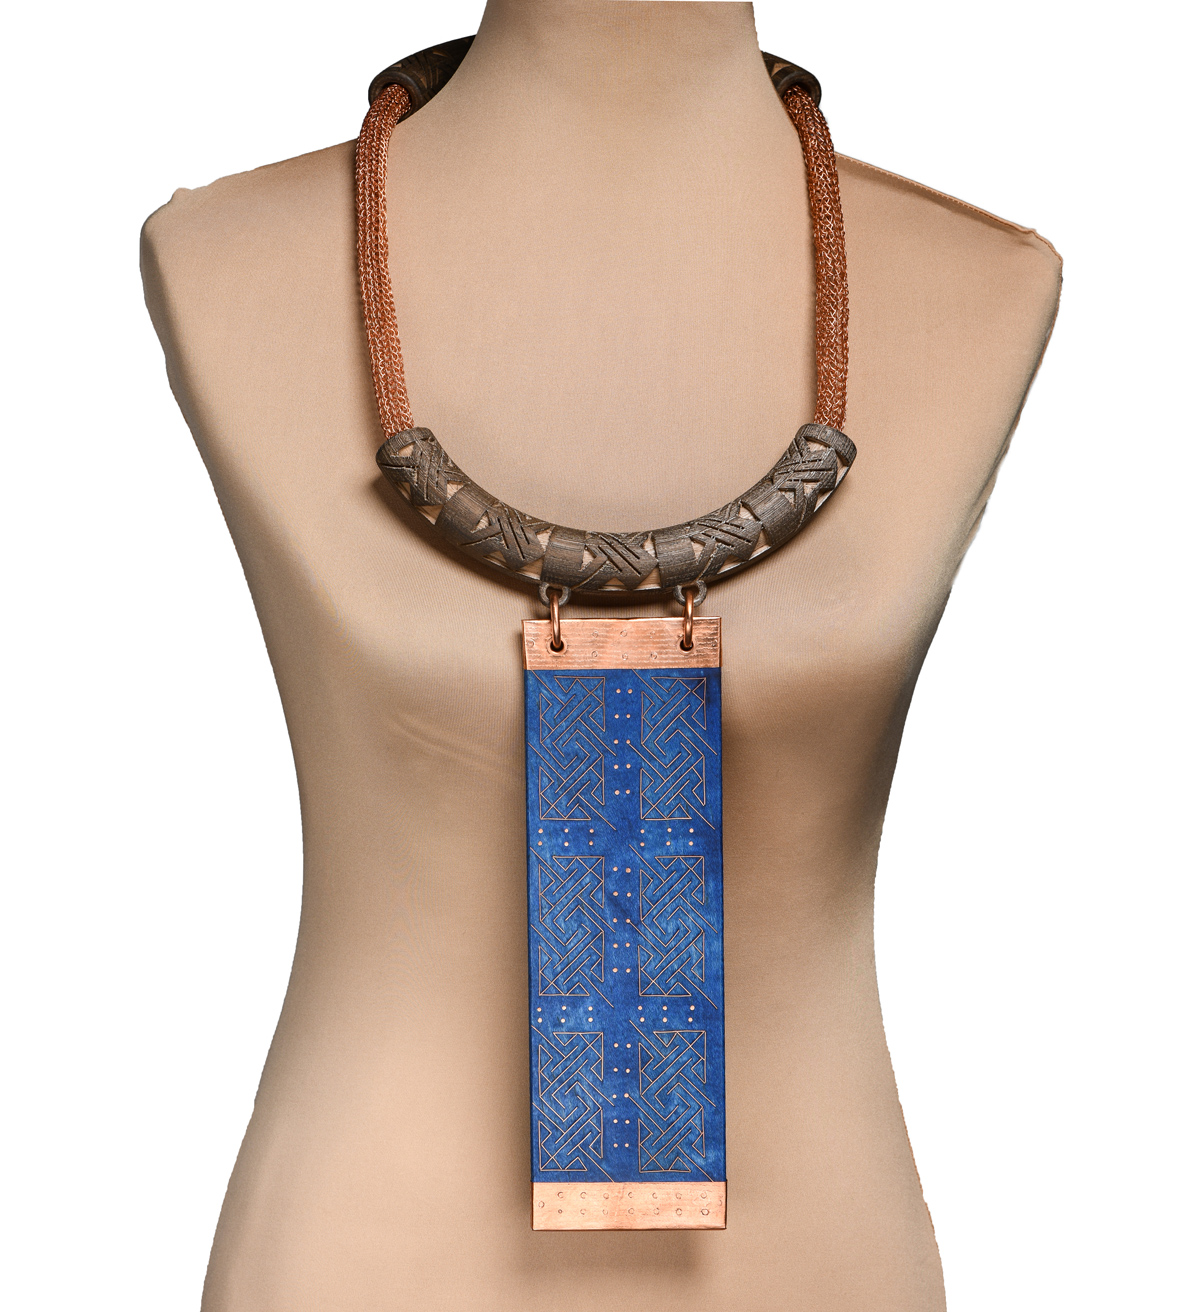 Necklace made with two 3D printed brown wood PLA tubes with etched carvings etched, knitted wire connects two tubes. A blue rectangle wooden pendant is attached to the necklace.